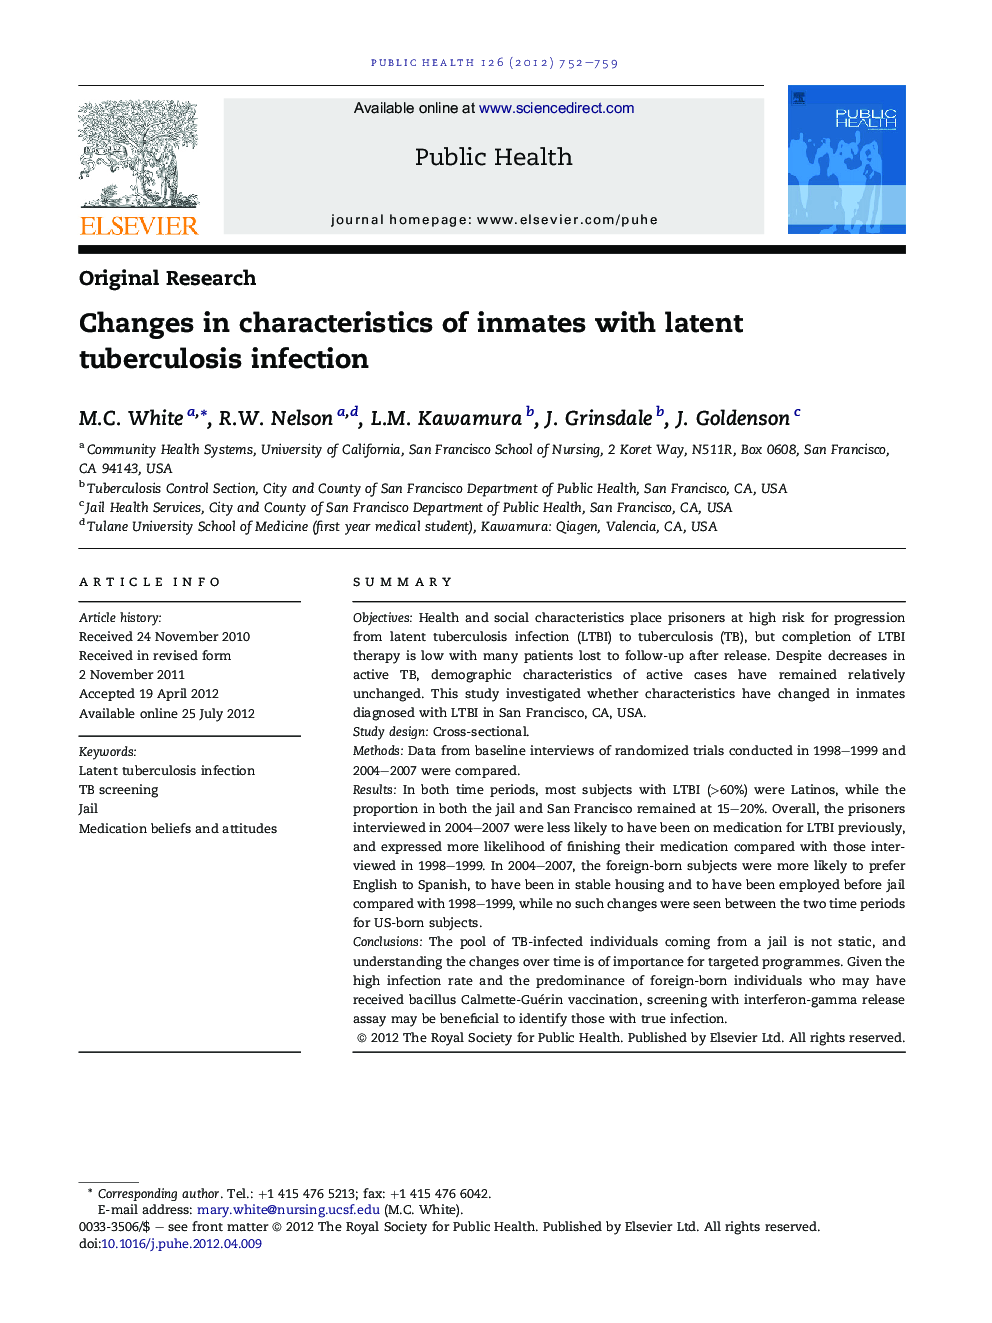 Changes in characteristics of inmates with latent tuberculosis infection